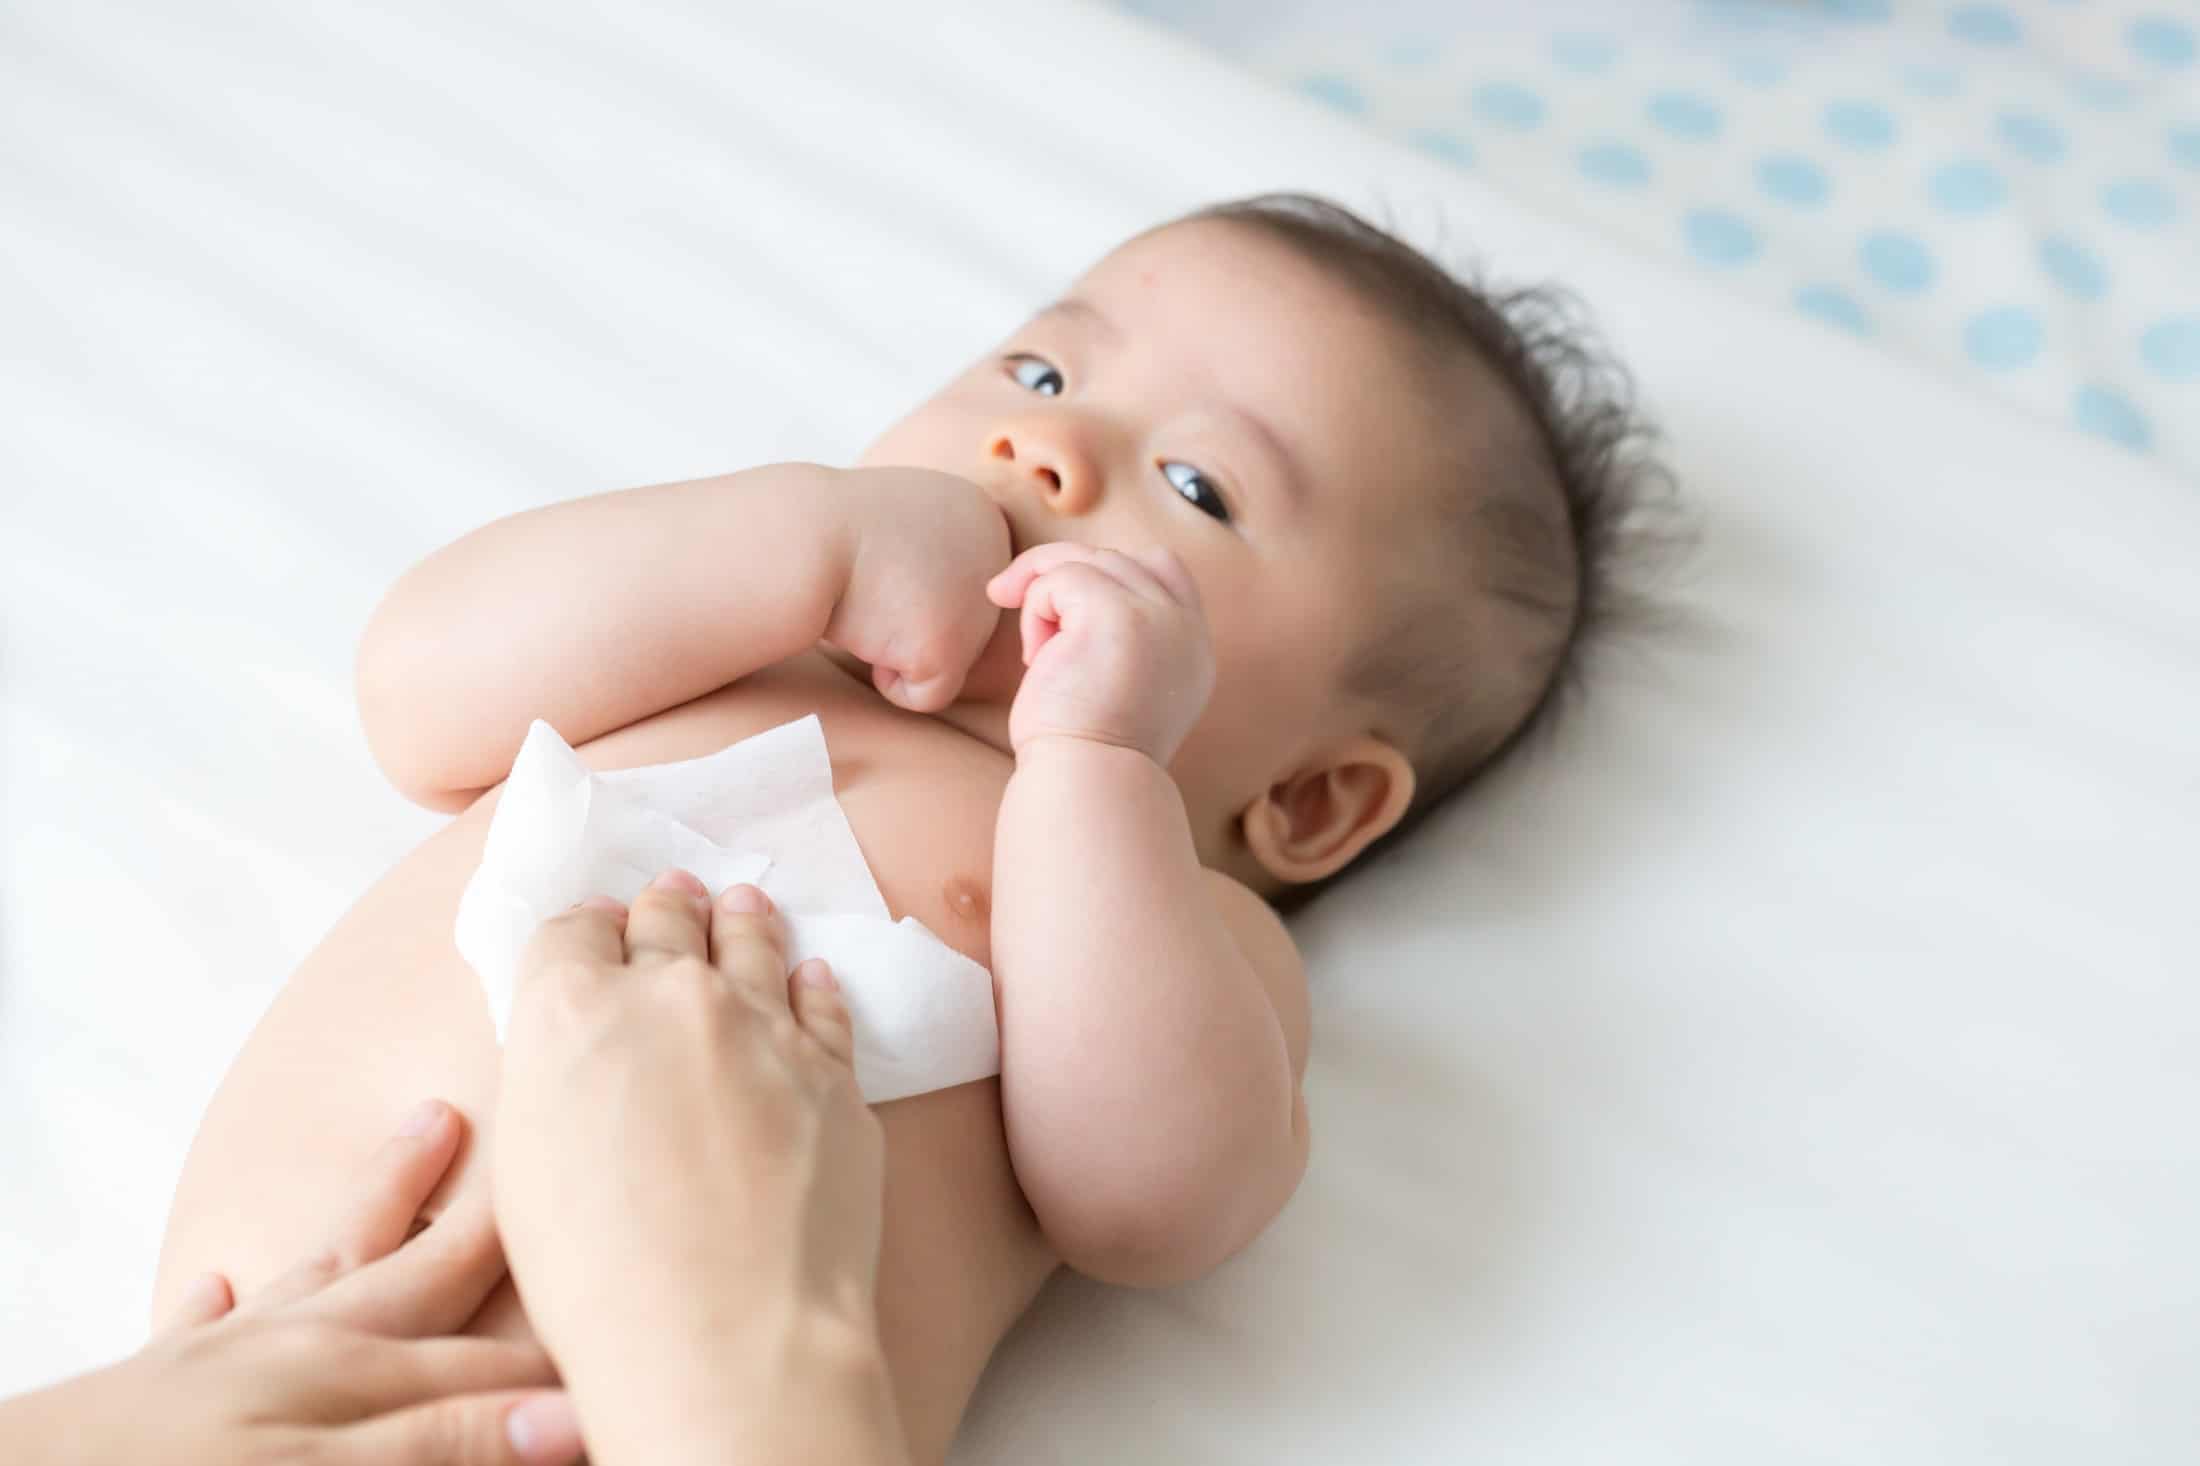 4 things to look for when choosing baby wet wipes